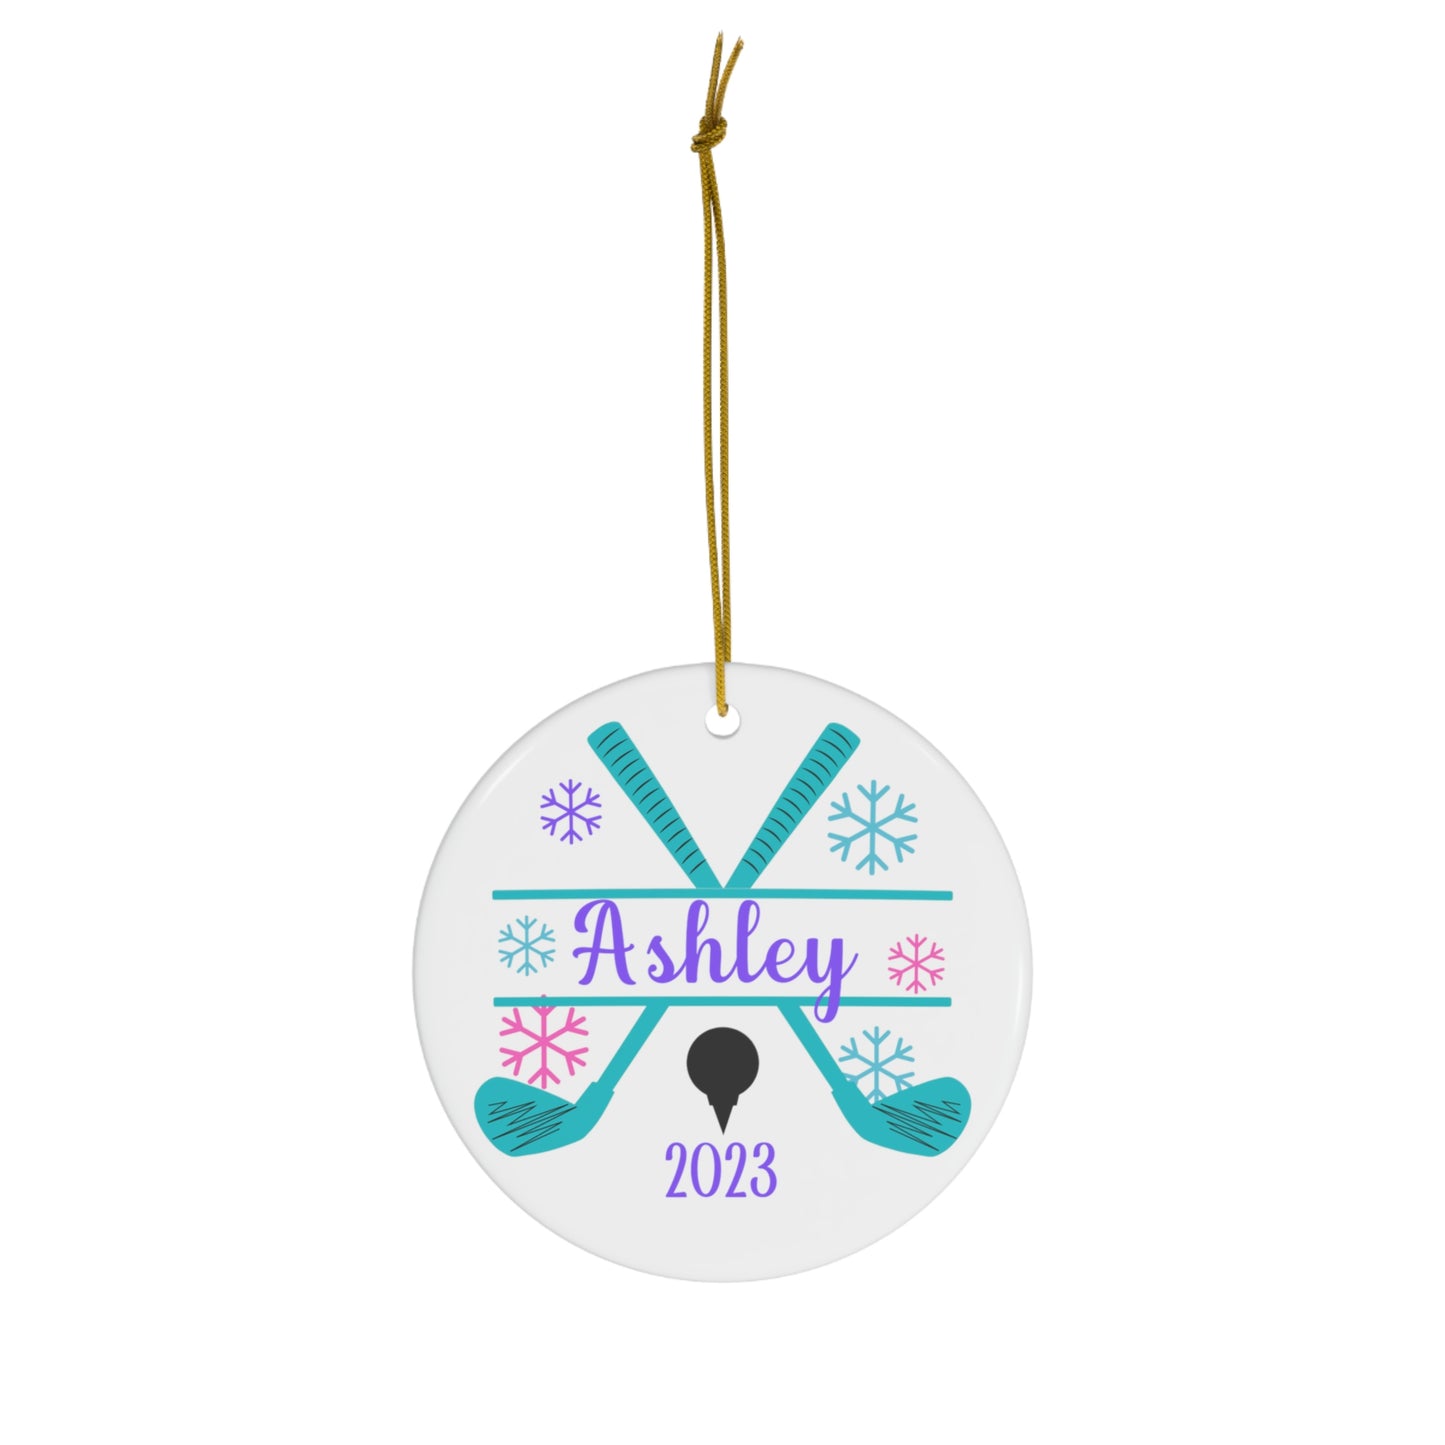 Girls Golf Ornament, Personalized Christmas Ceramic Golf Christmas Tree Ornament for Golfers, 2023 Holiday Ornament